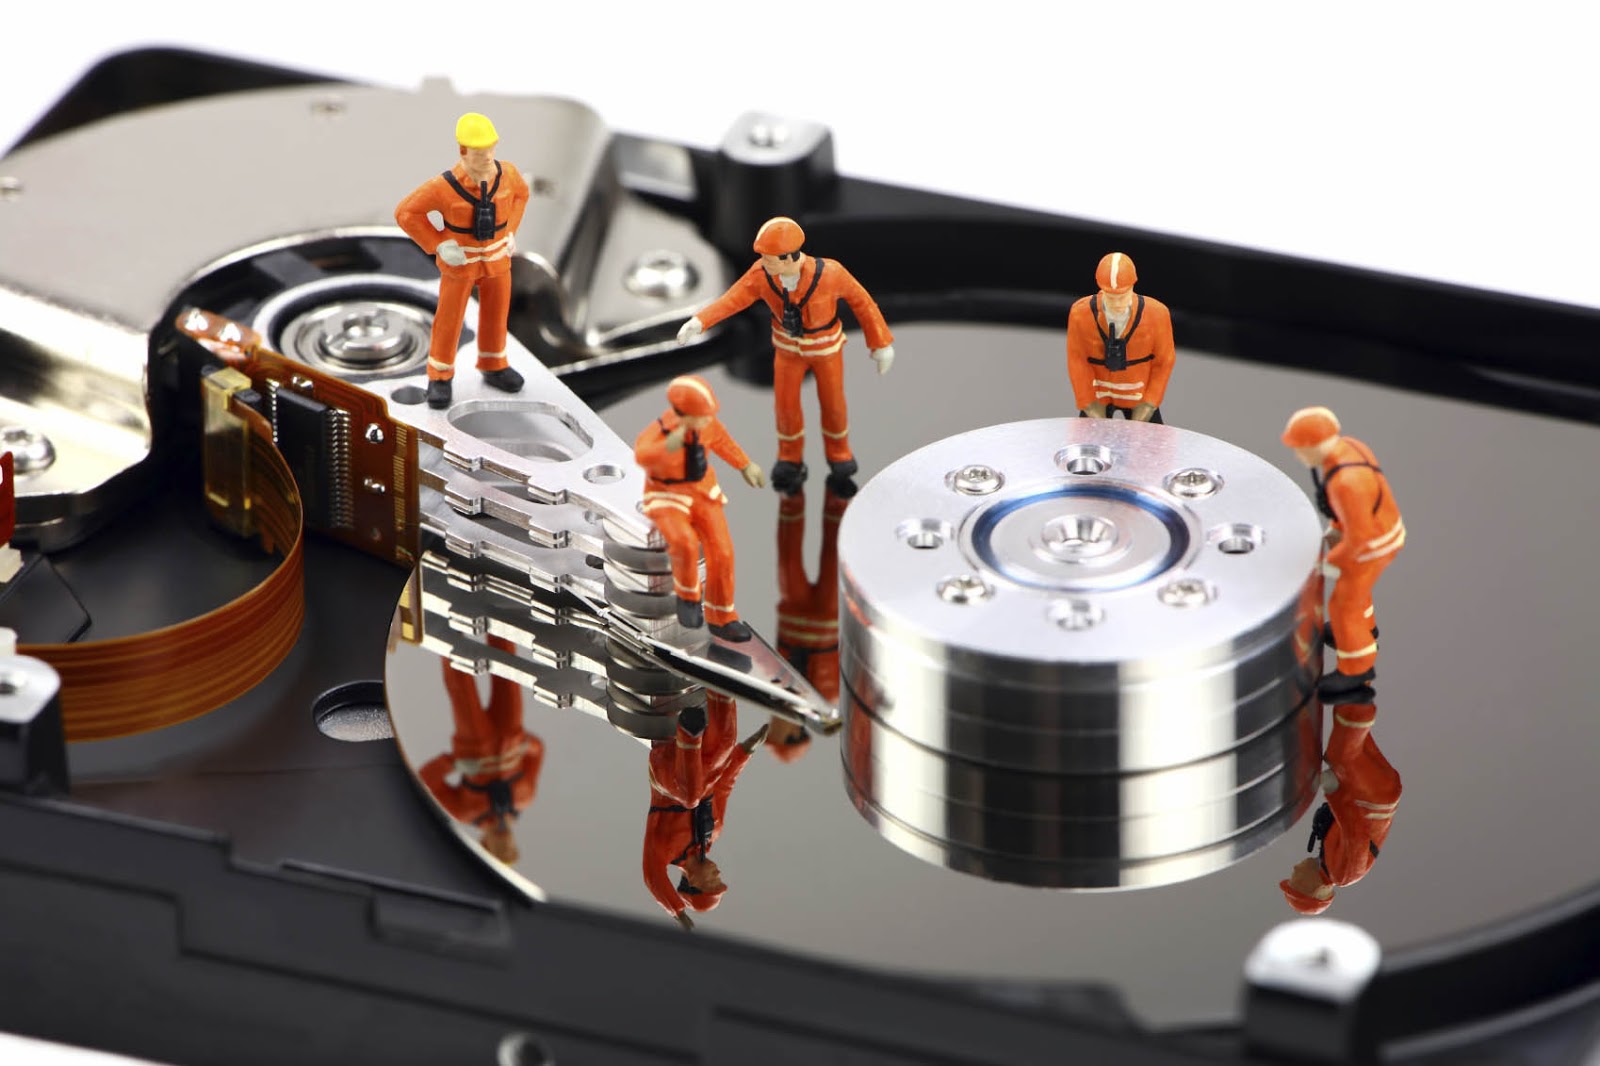 Recover lost data from any Storage device using EaseUS Data Recovery Wizard 6